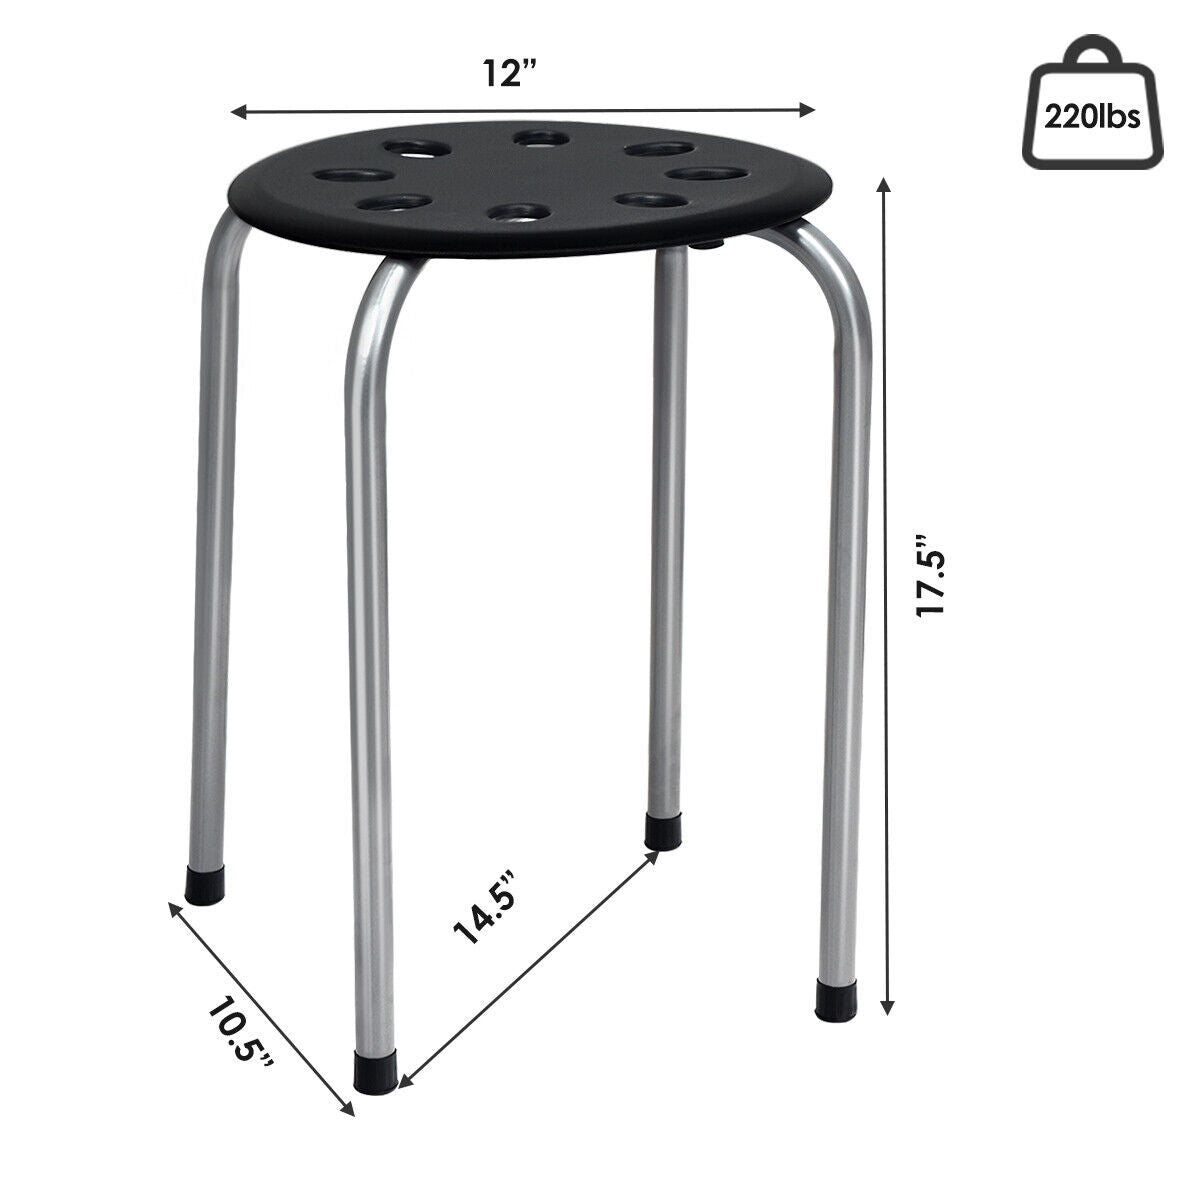 Stool Set of 6 -  Stackable Kitchen Stools With Antiskid Foot Caps